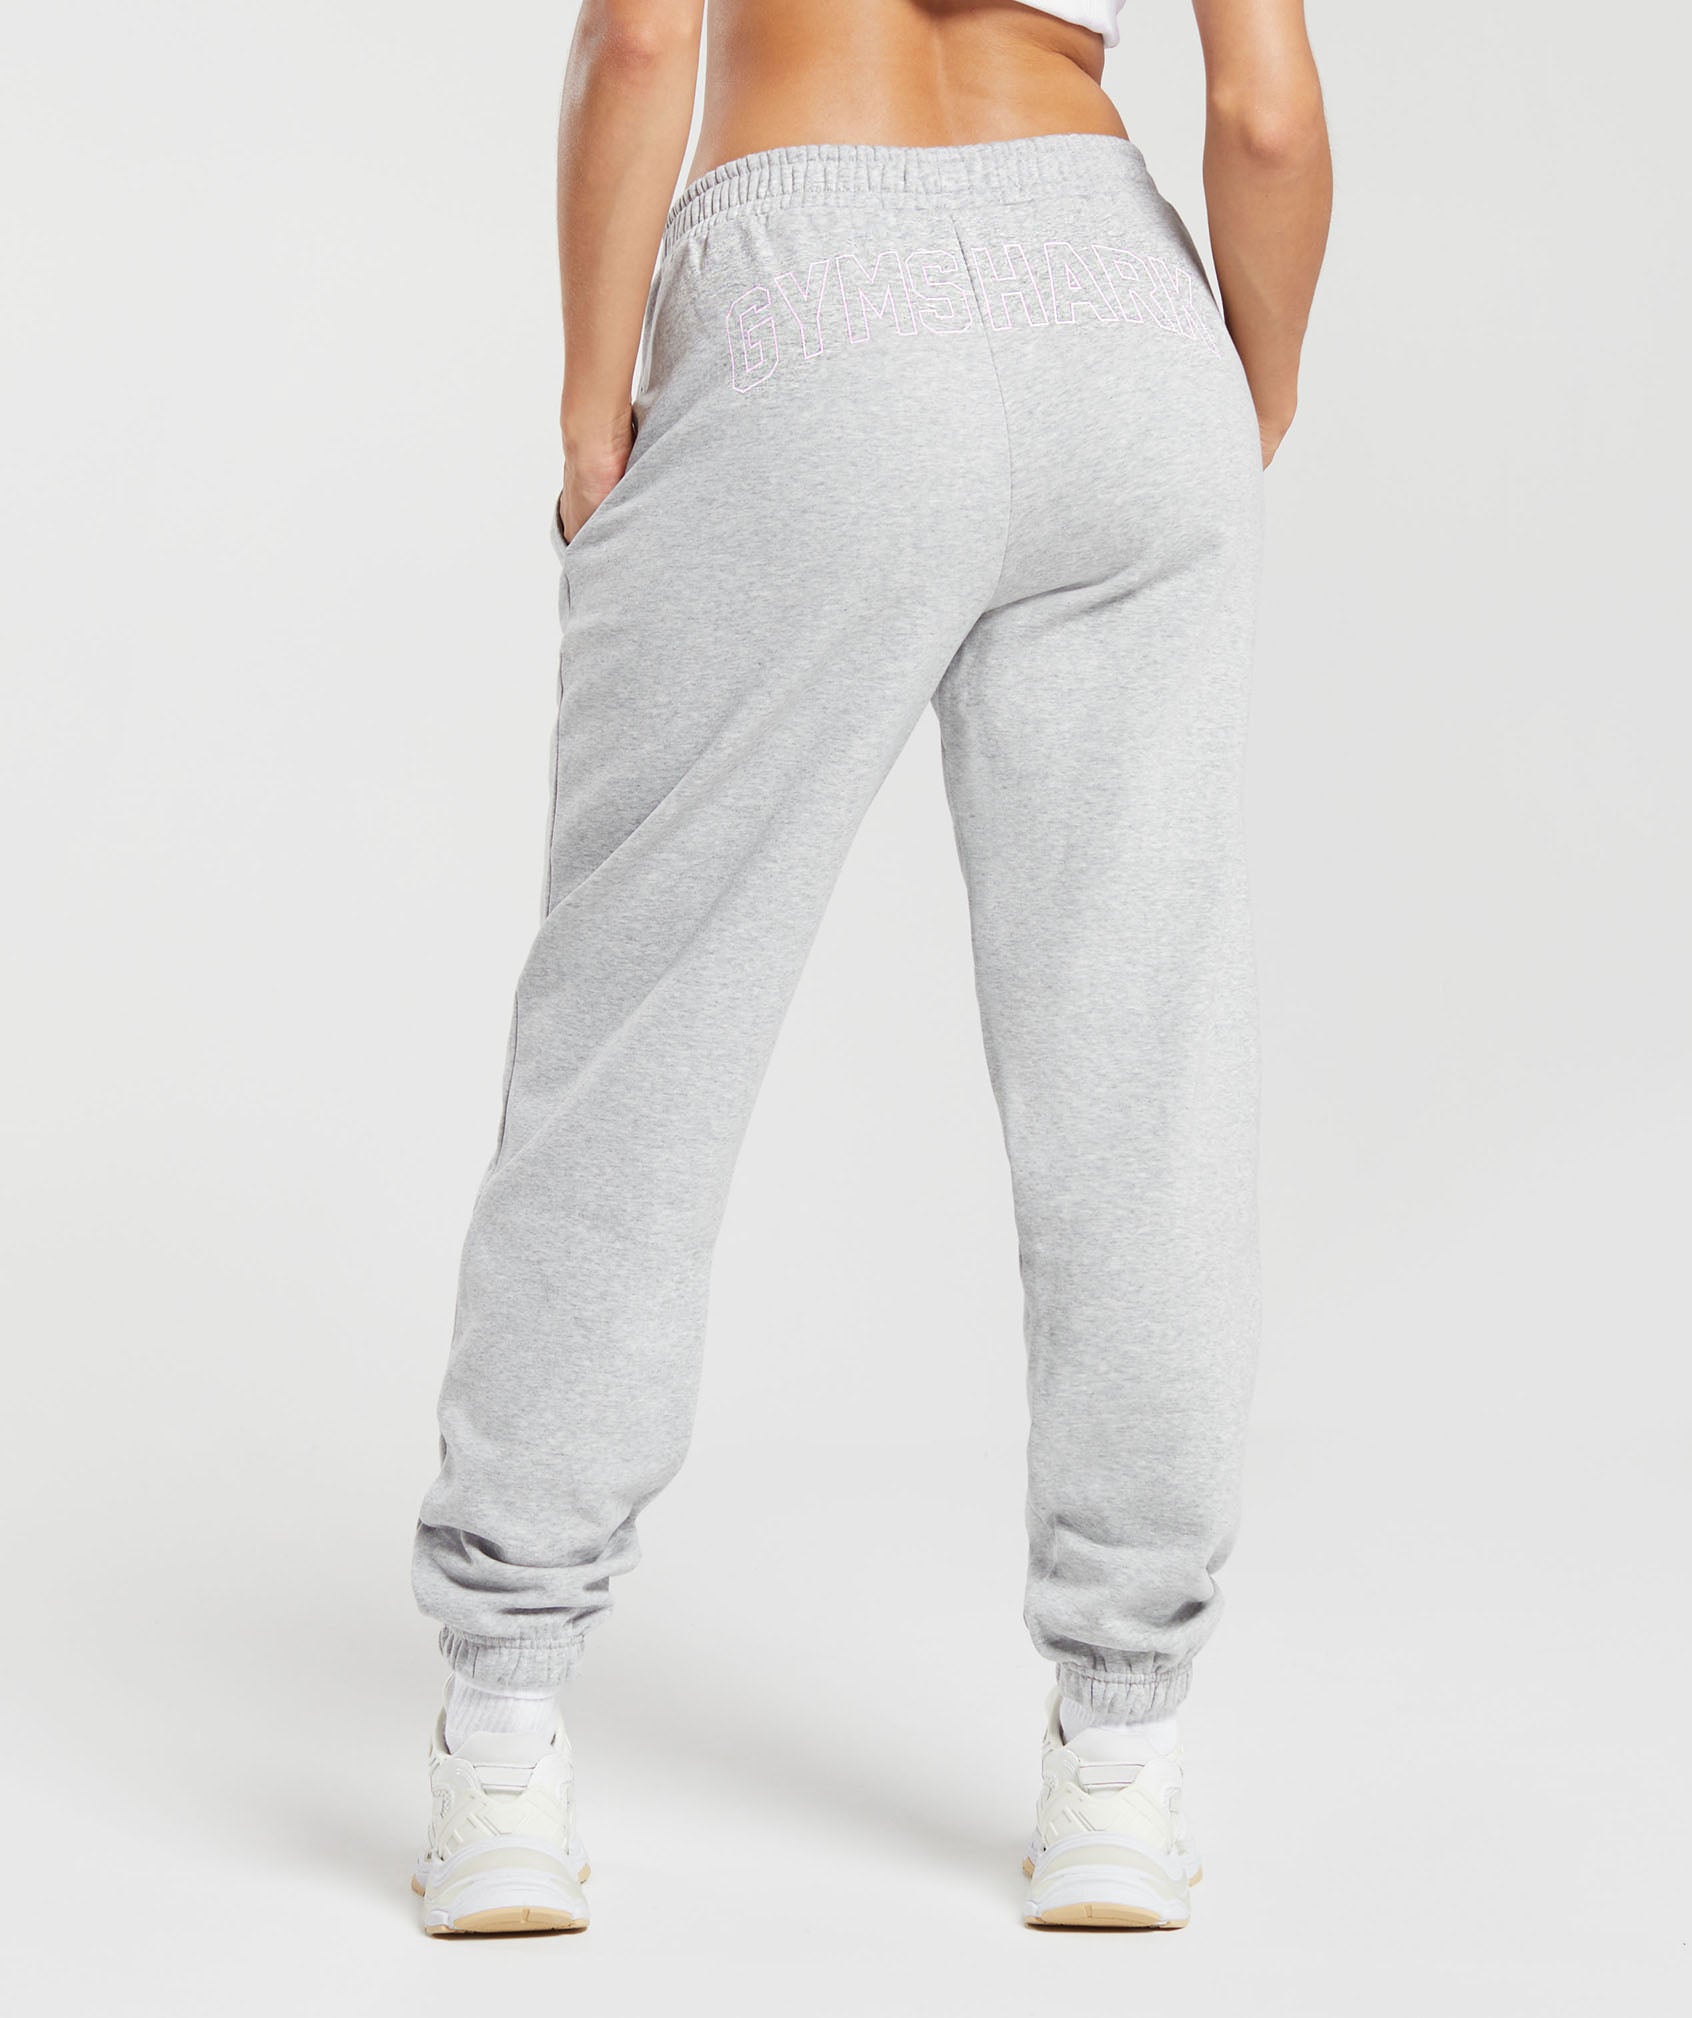 Strength Department Graphic Joggers in Light Grey Core Marl - view 2